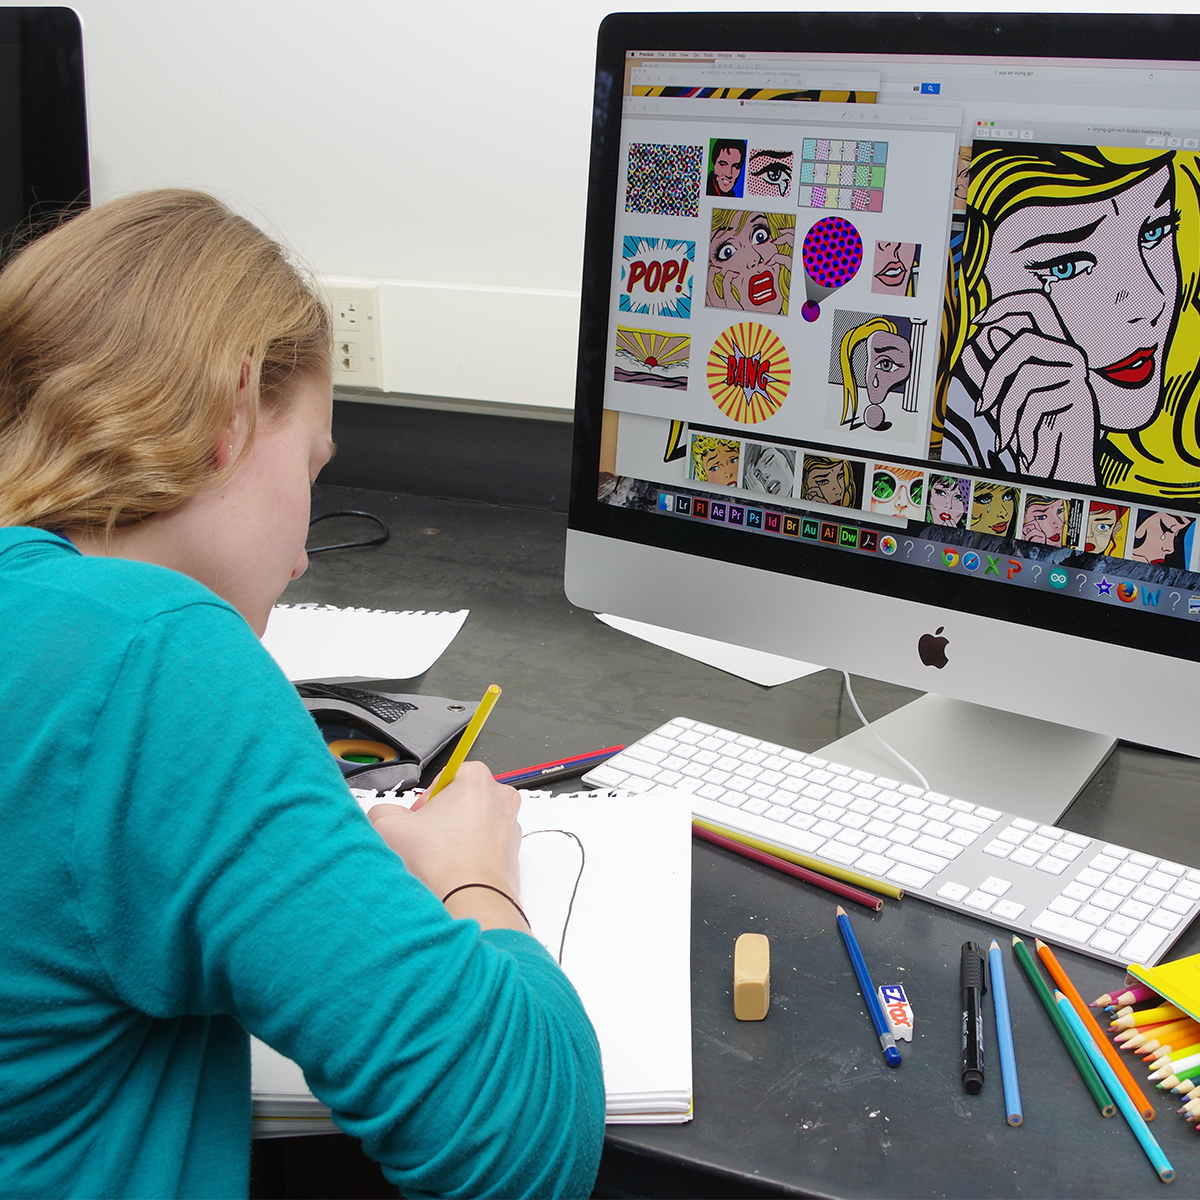 Student working on graphic design